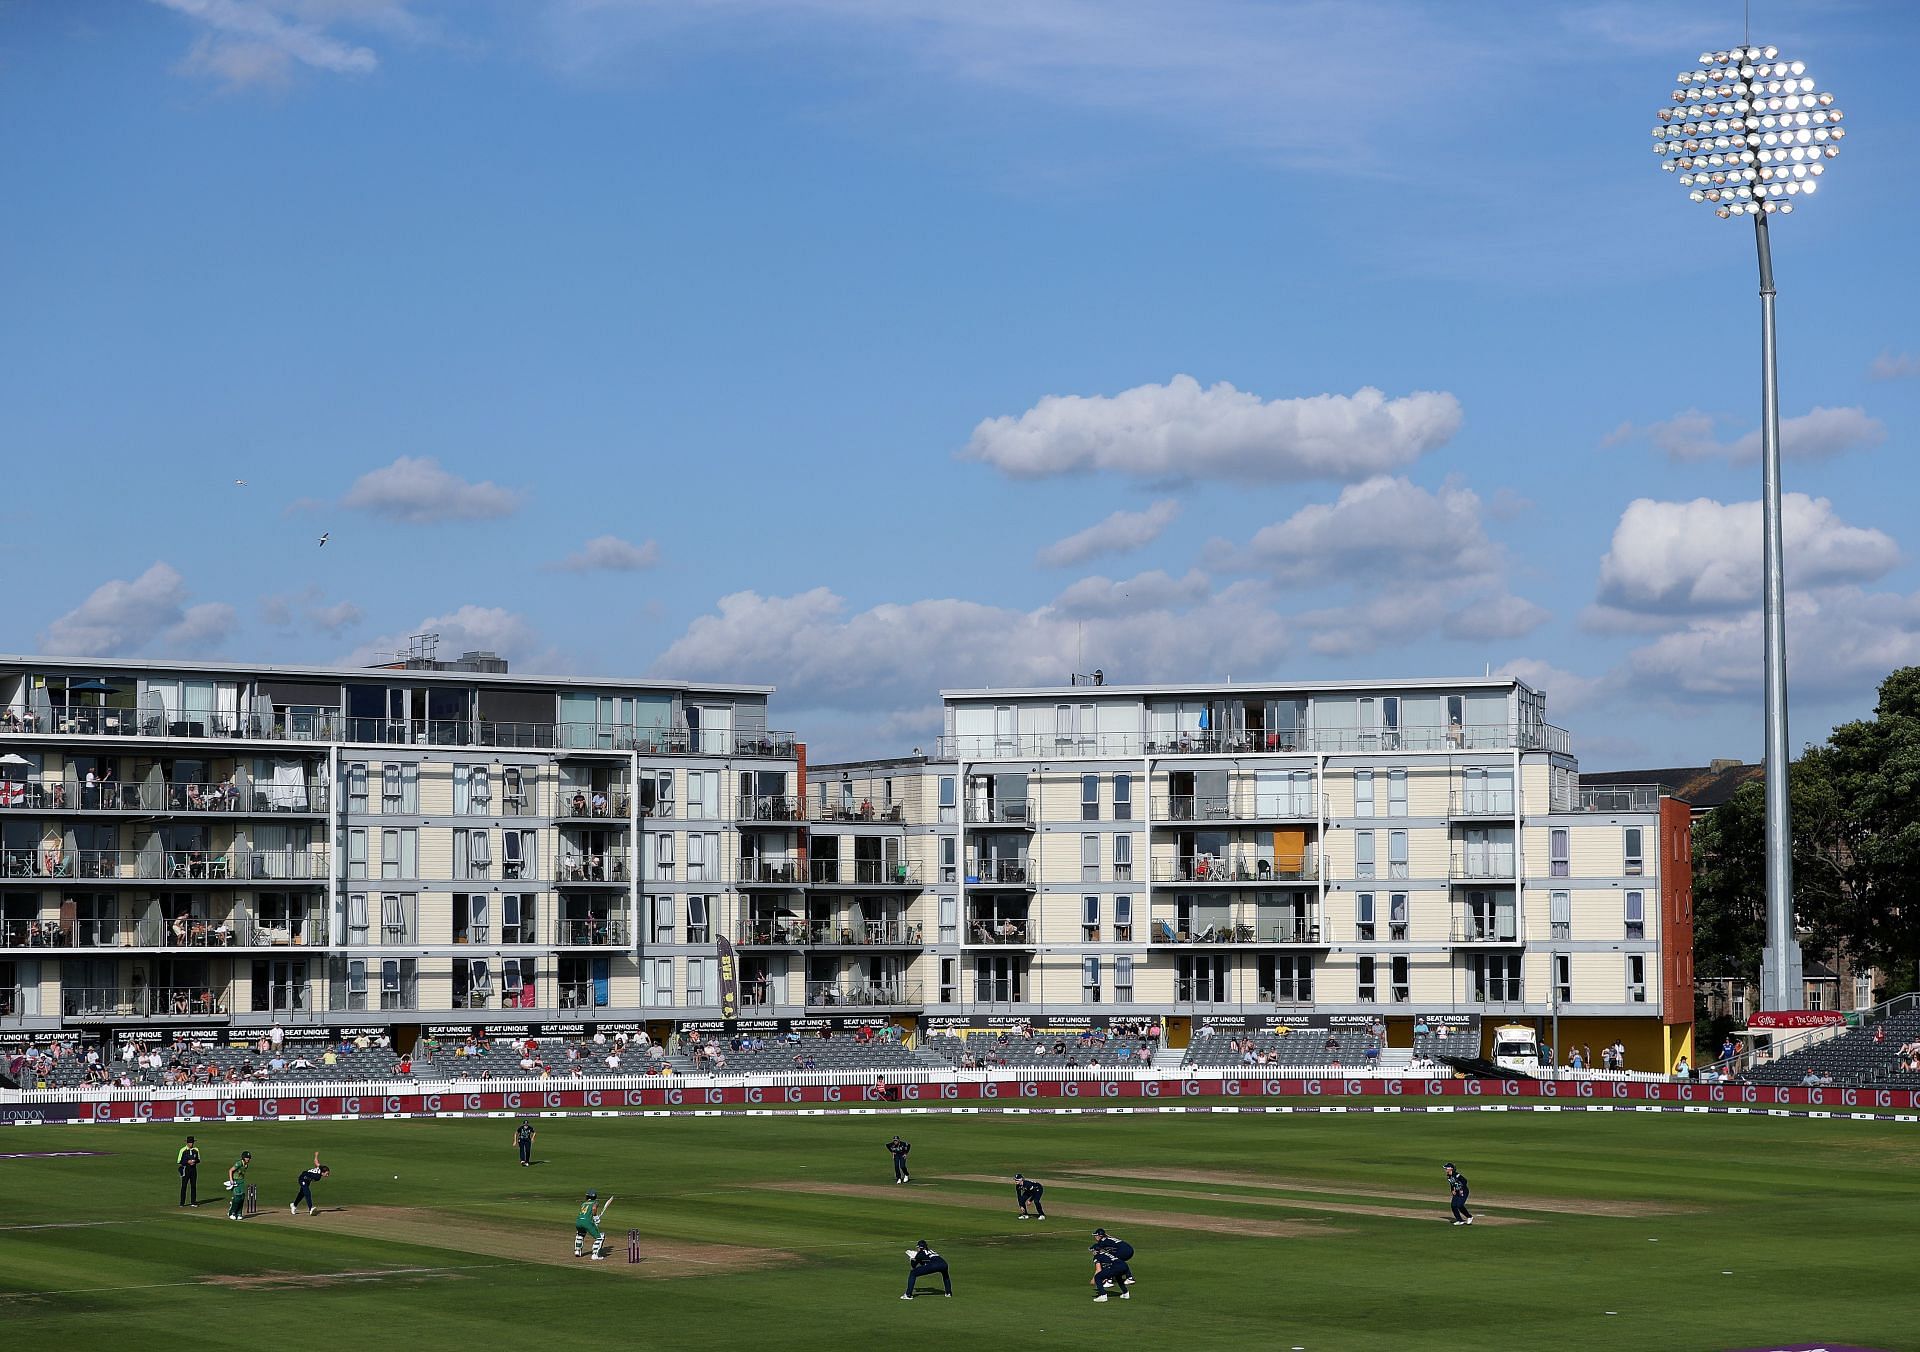 England Women v South Africa Women - 2nd Royal London Series One Day International (Image Courtesy: Getty Images)